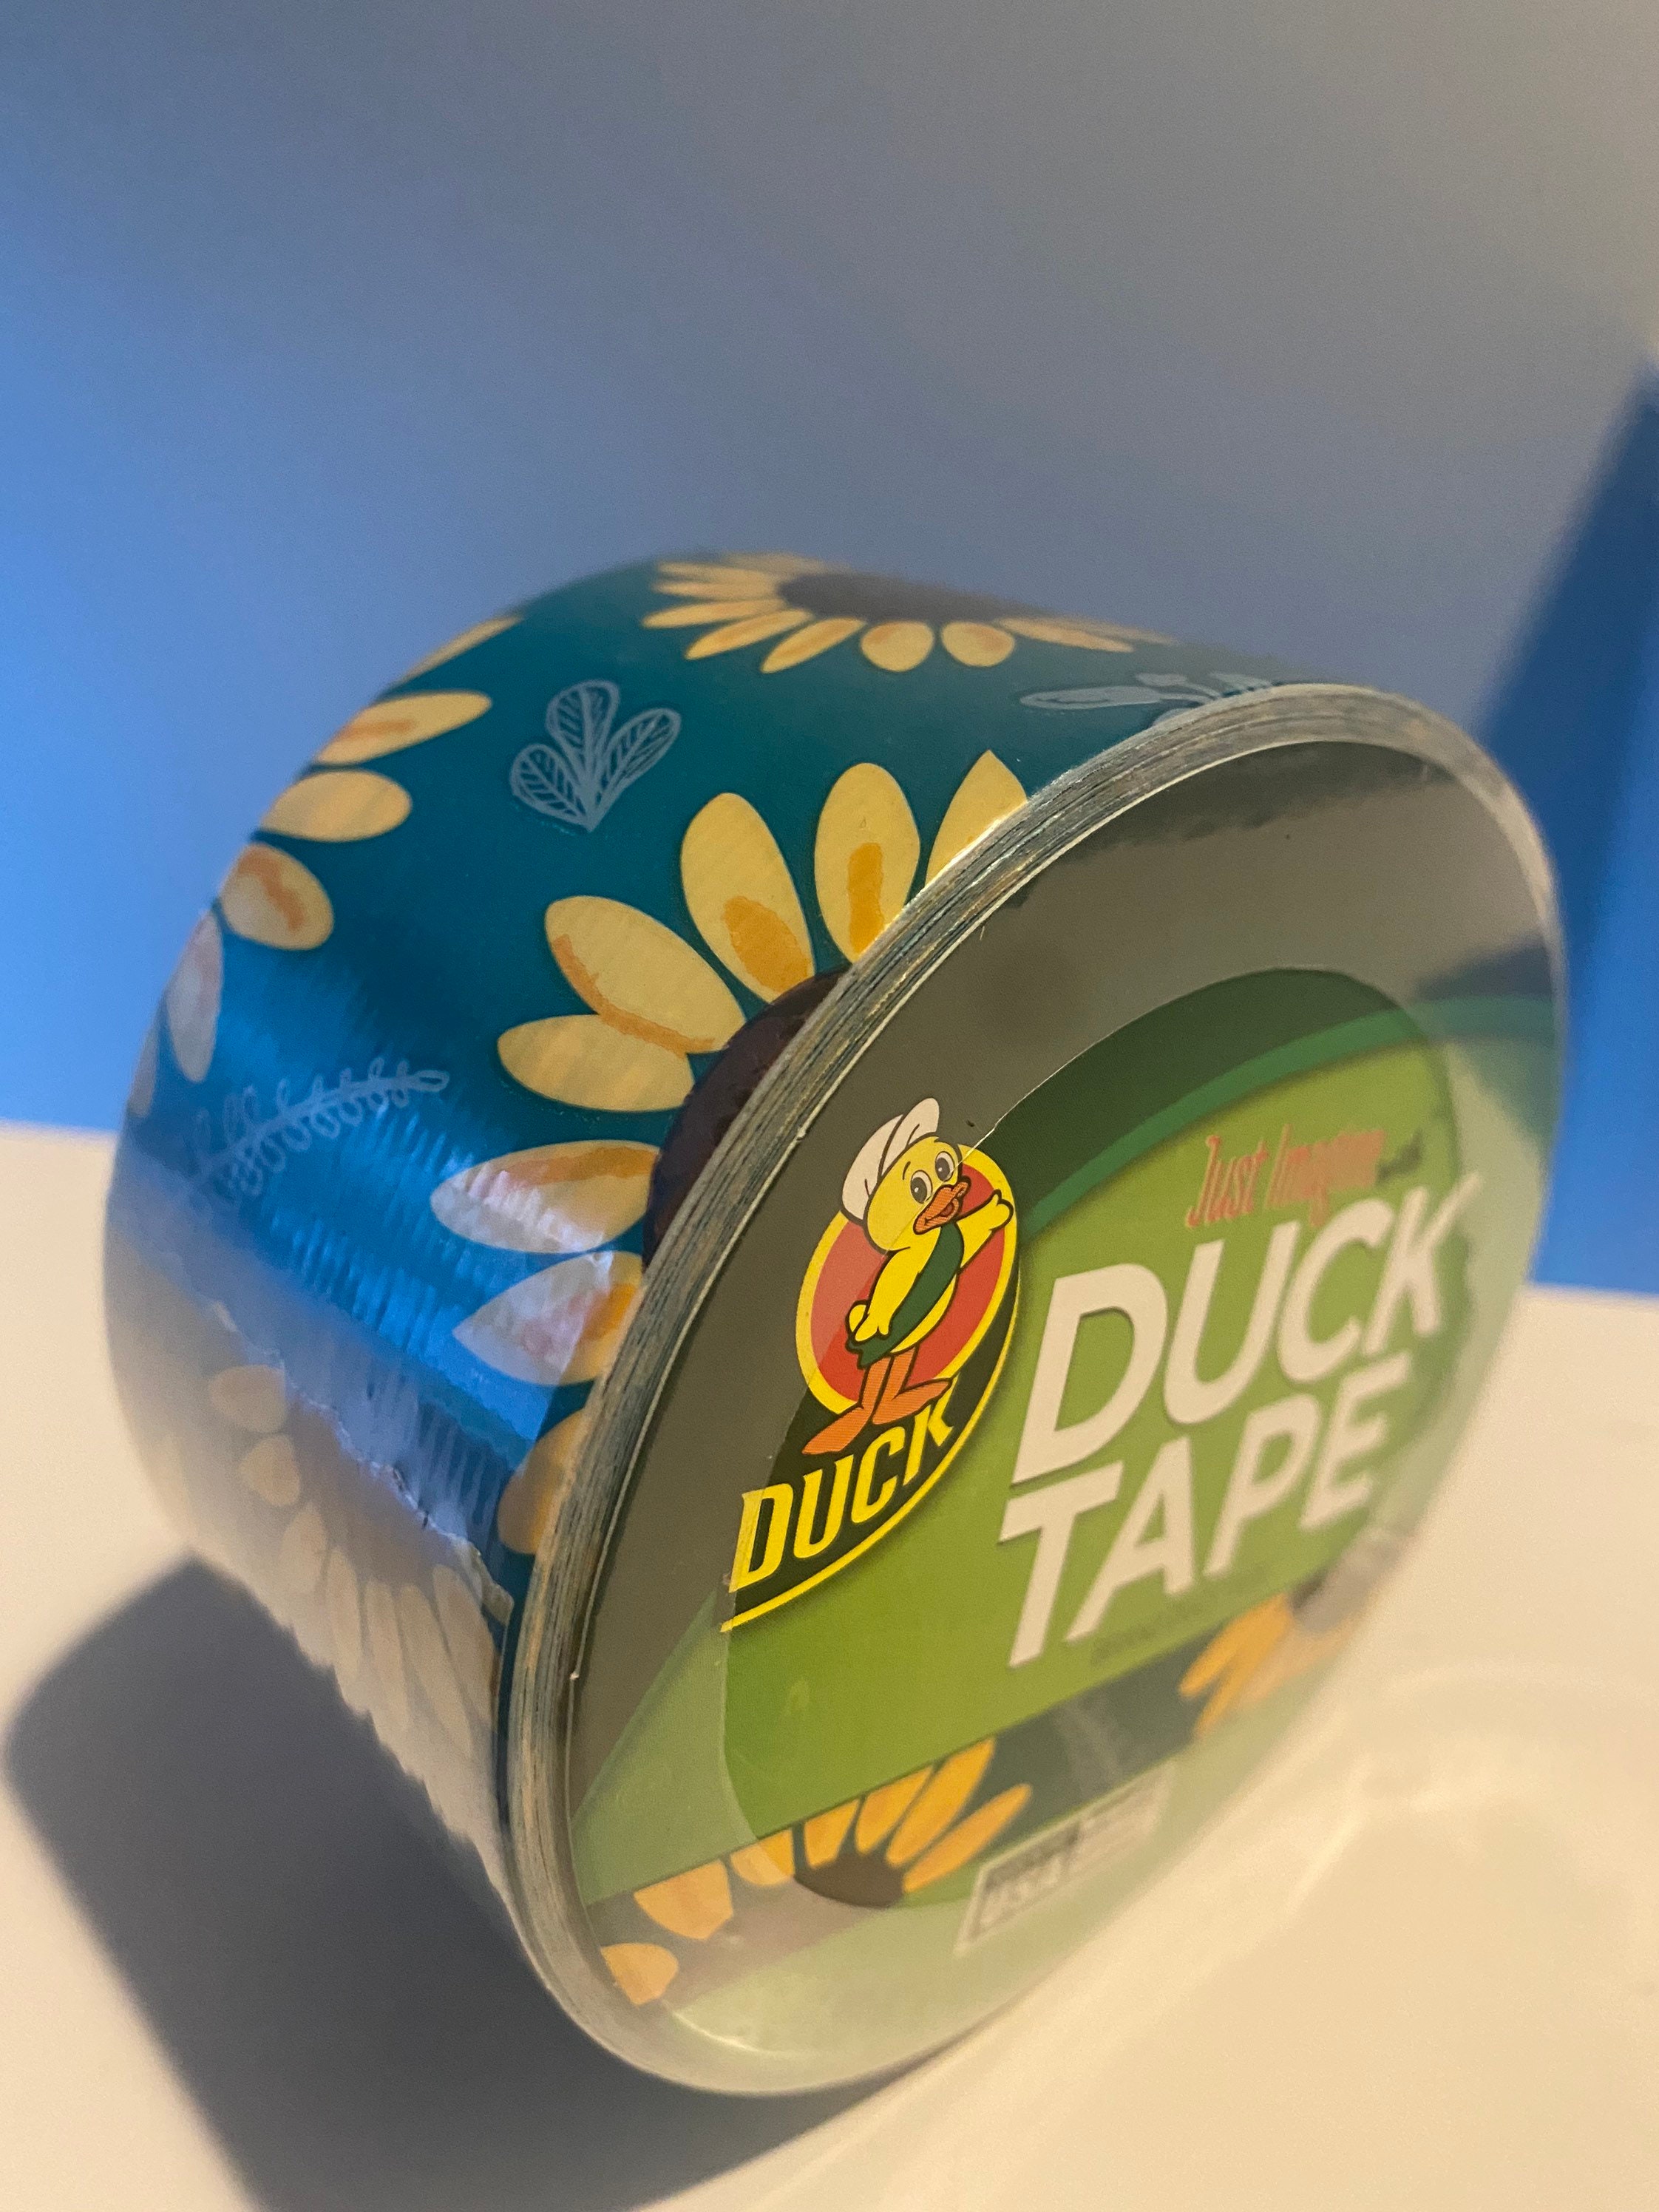 Transparent Duct Tape 1.88 Inches by 20 Yards, Clear, Strong, Waterproof,  Multipurpose Duct Tape, Duck 